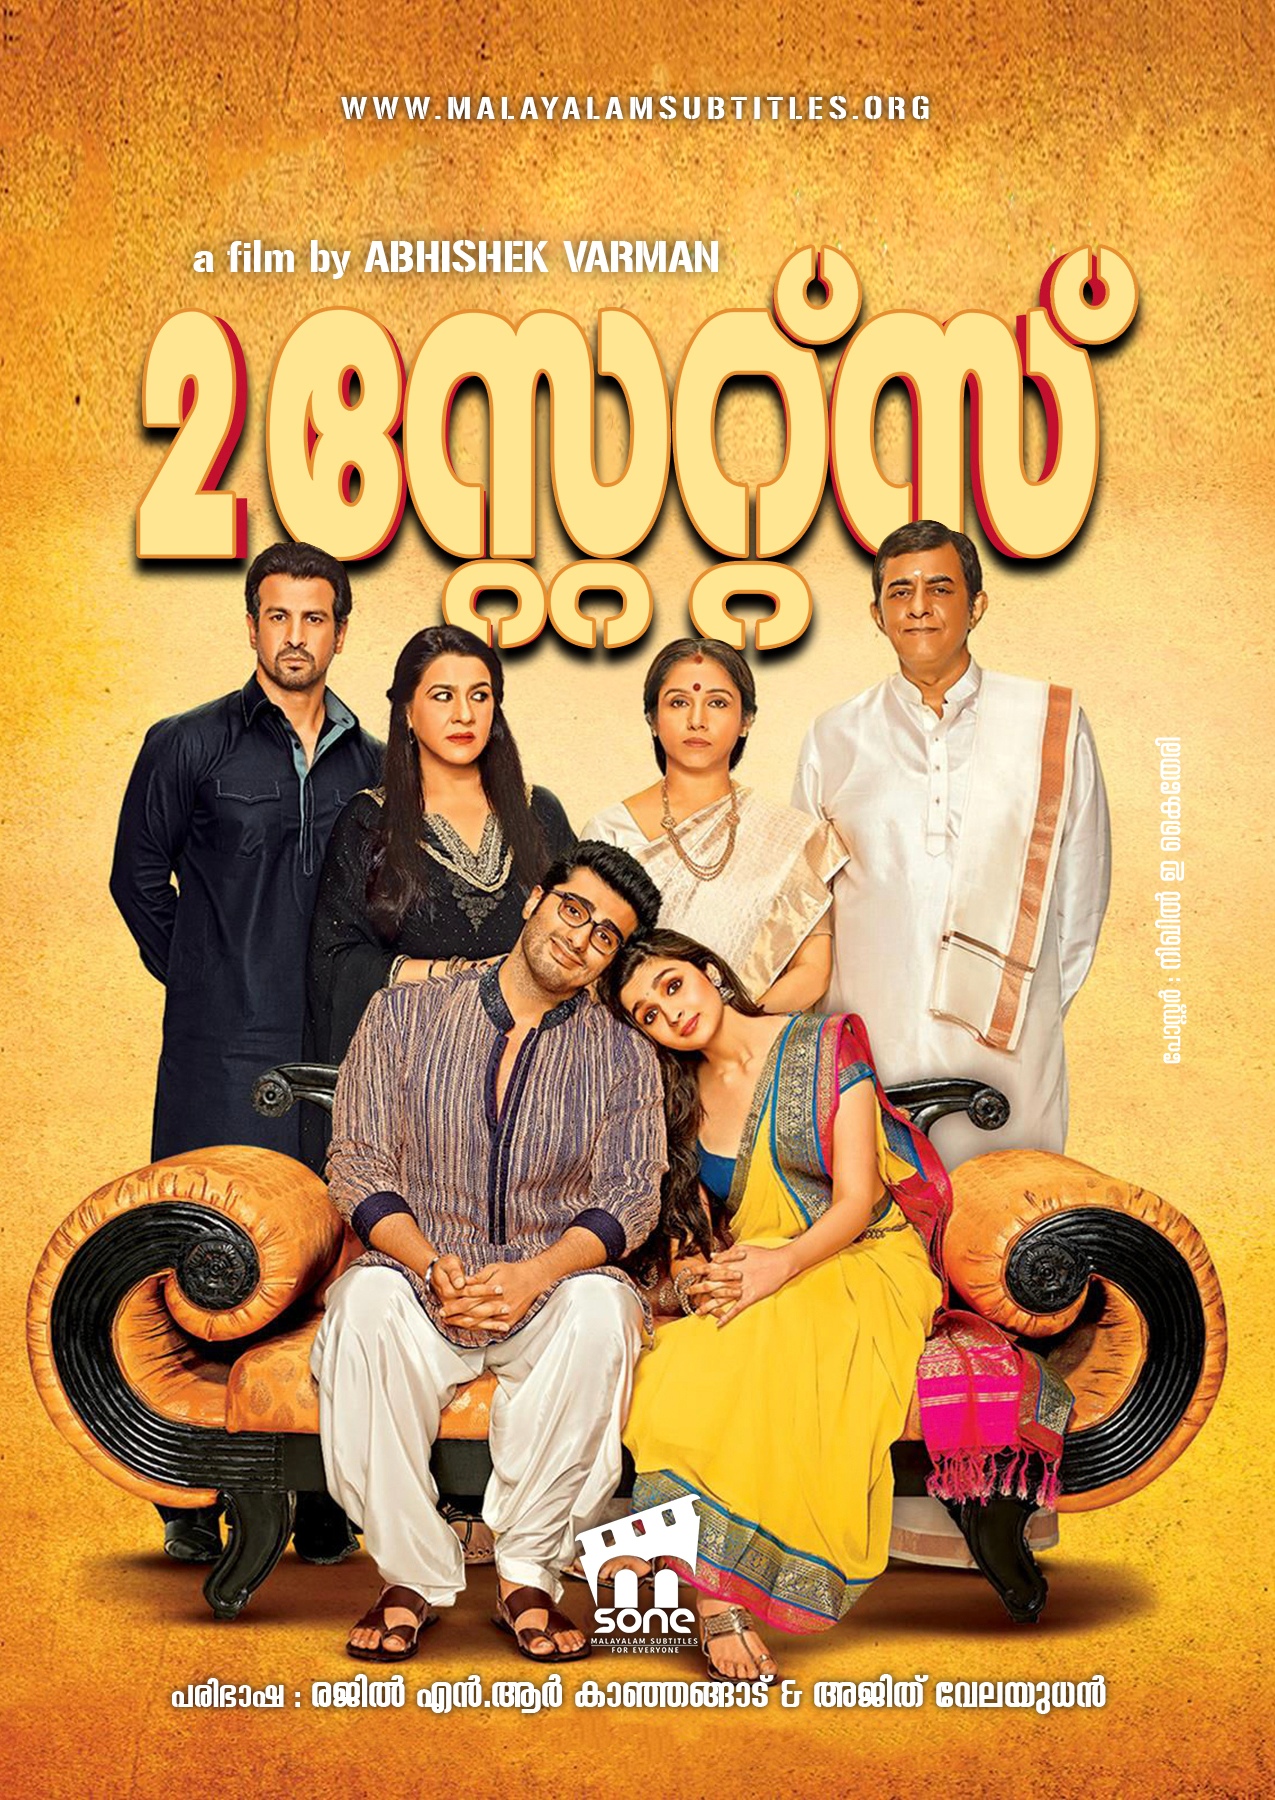 2 states full movie hd with english subtitles watch online